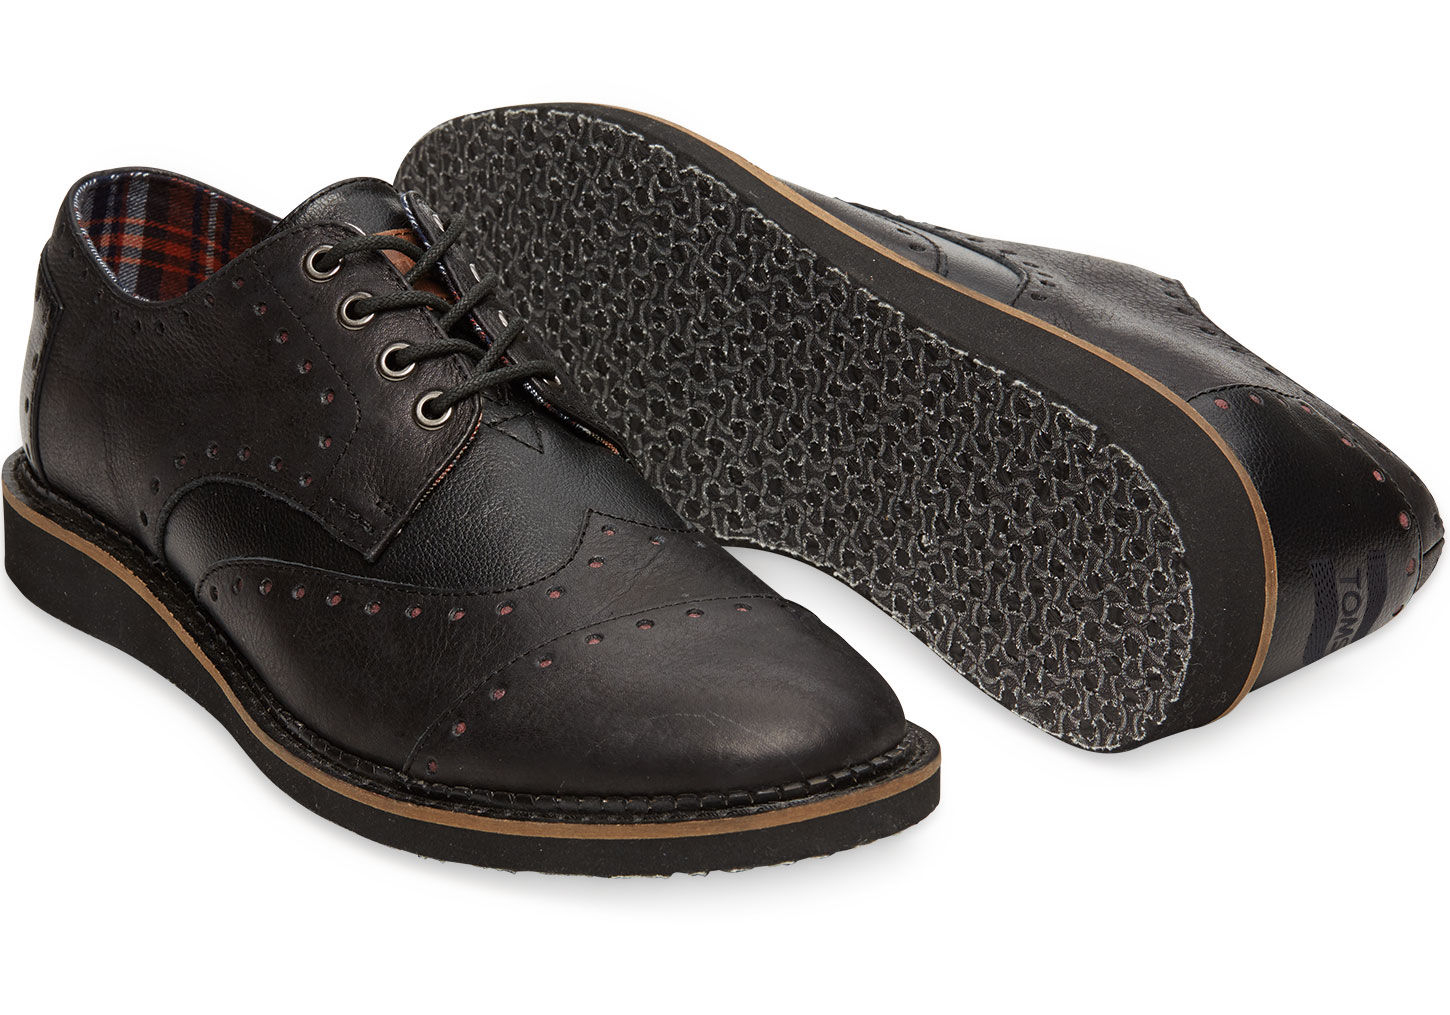 black leather brogues